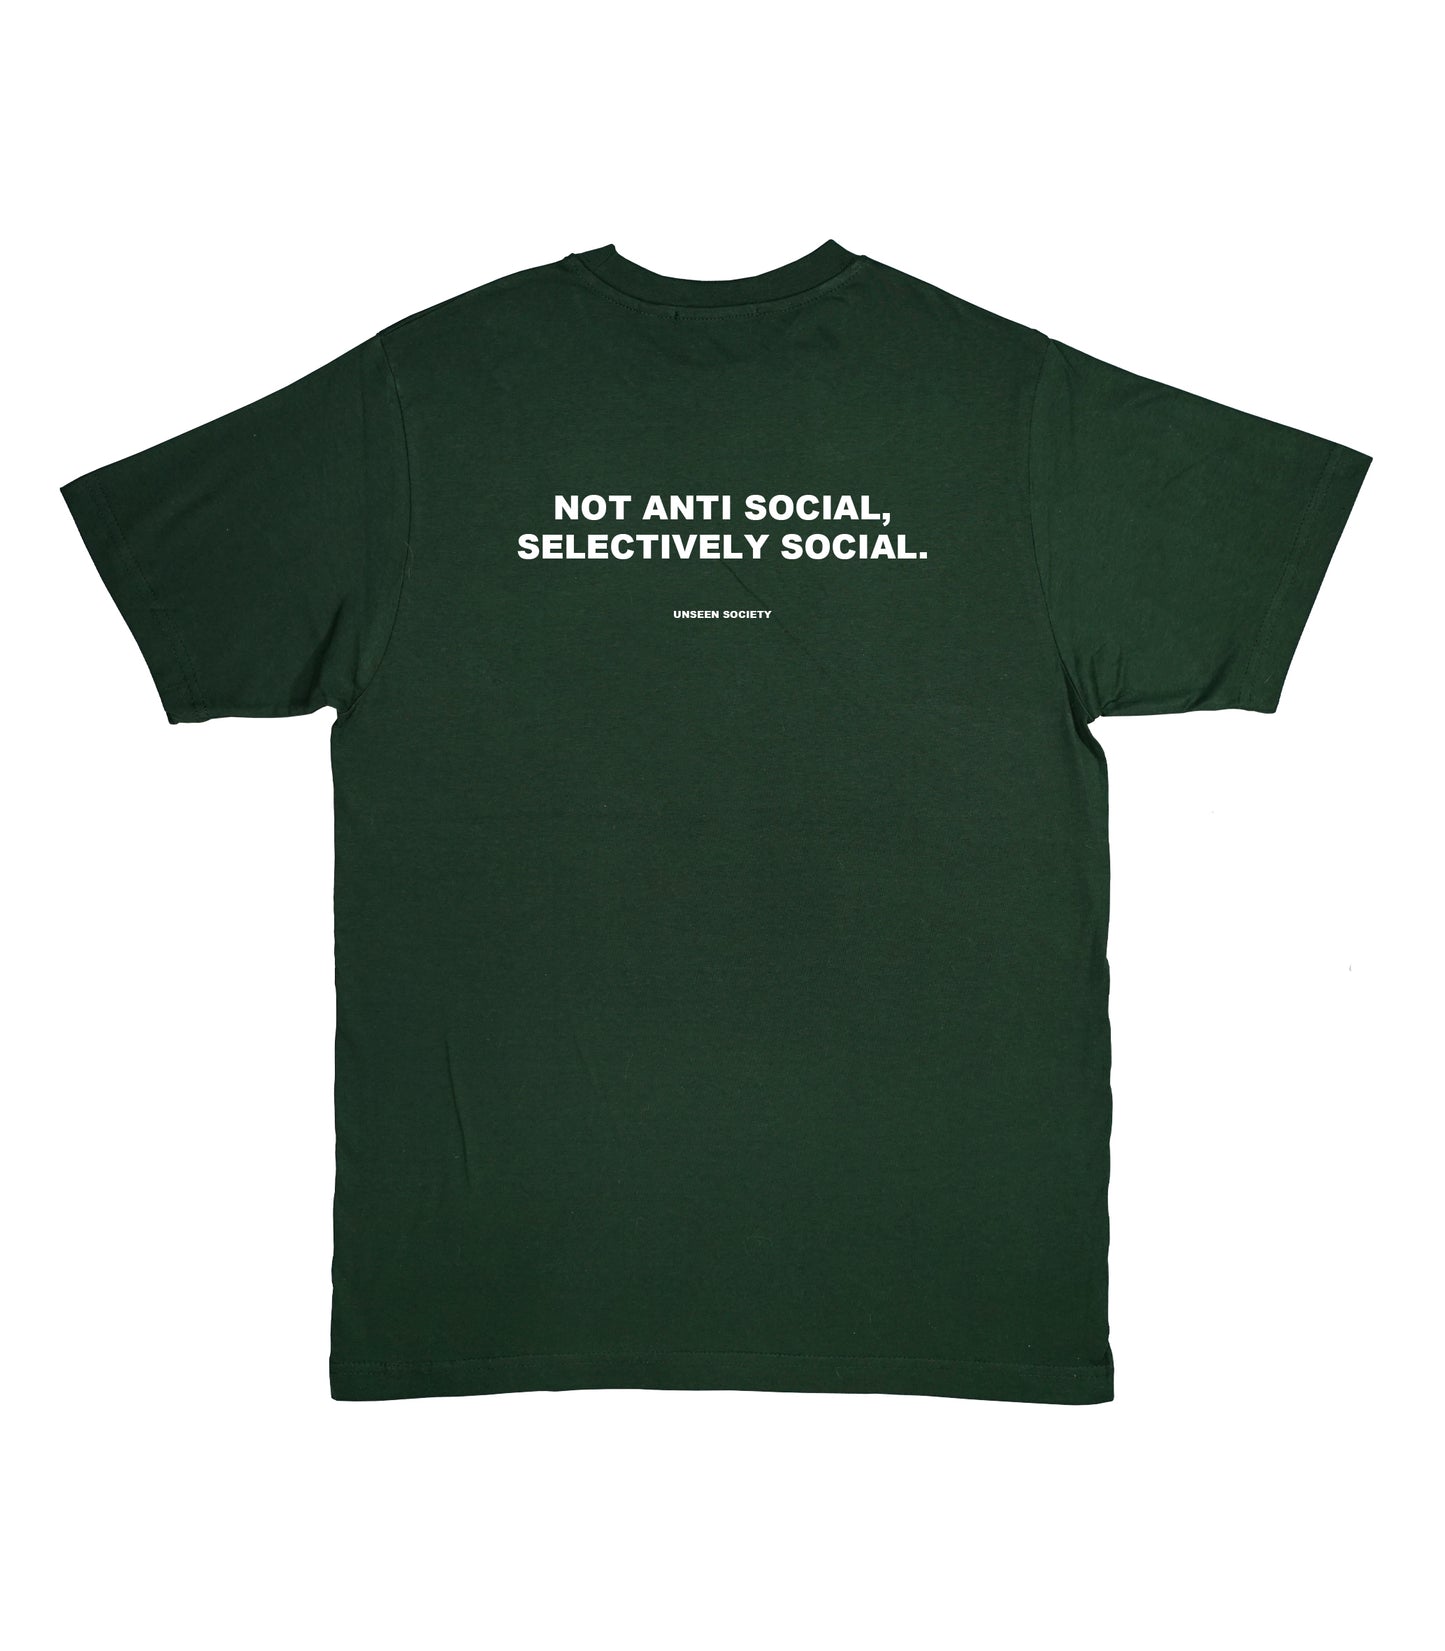 Not anti social quote tee